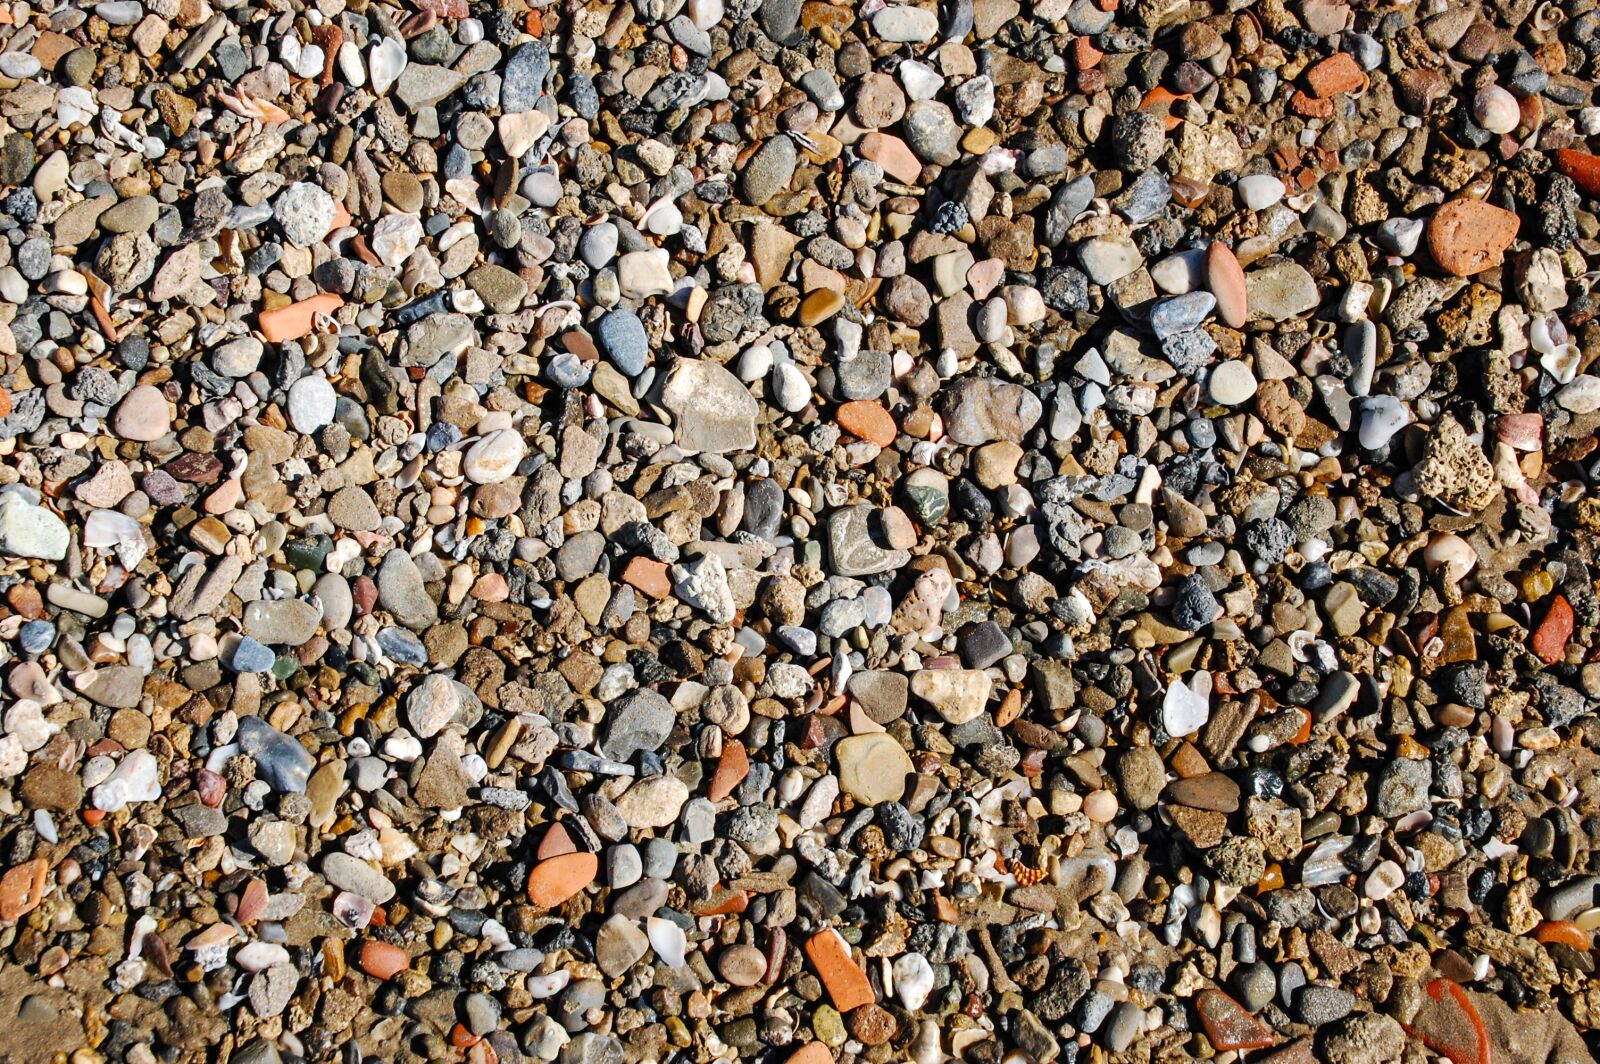 Tamron AF 18-270mm F3.5-6.3 Di II VC LD Aspherical (IF) MACRO sample photo. Stones, pebbles, small stones photography